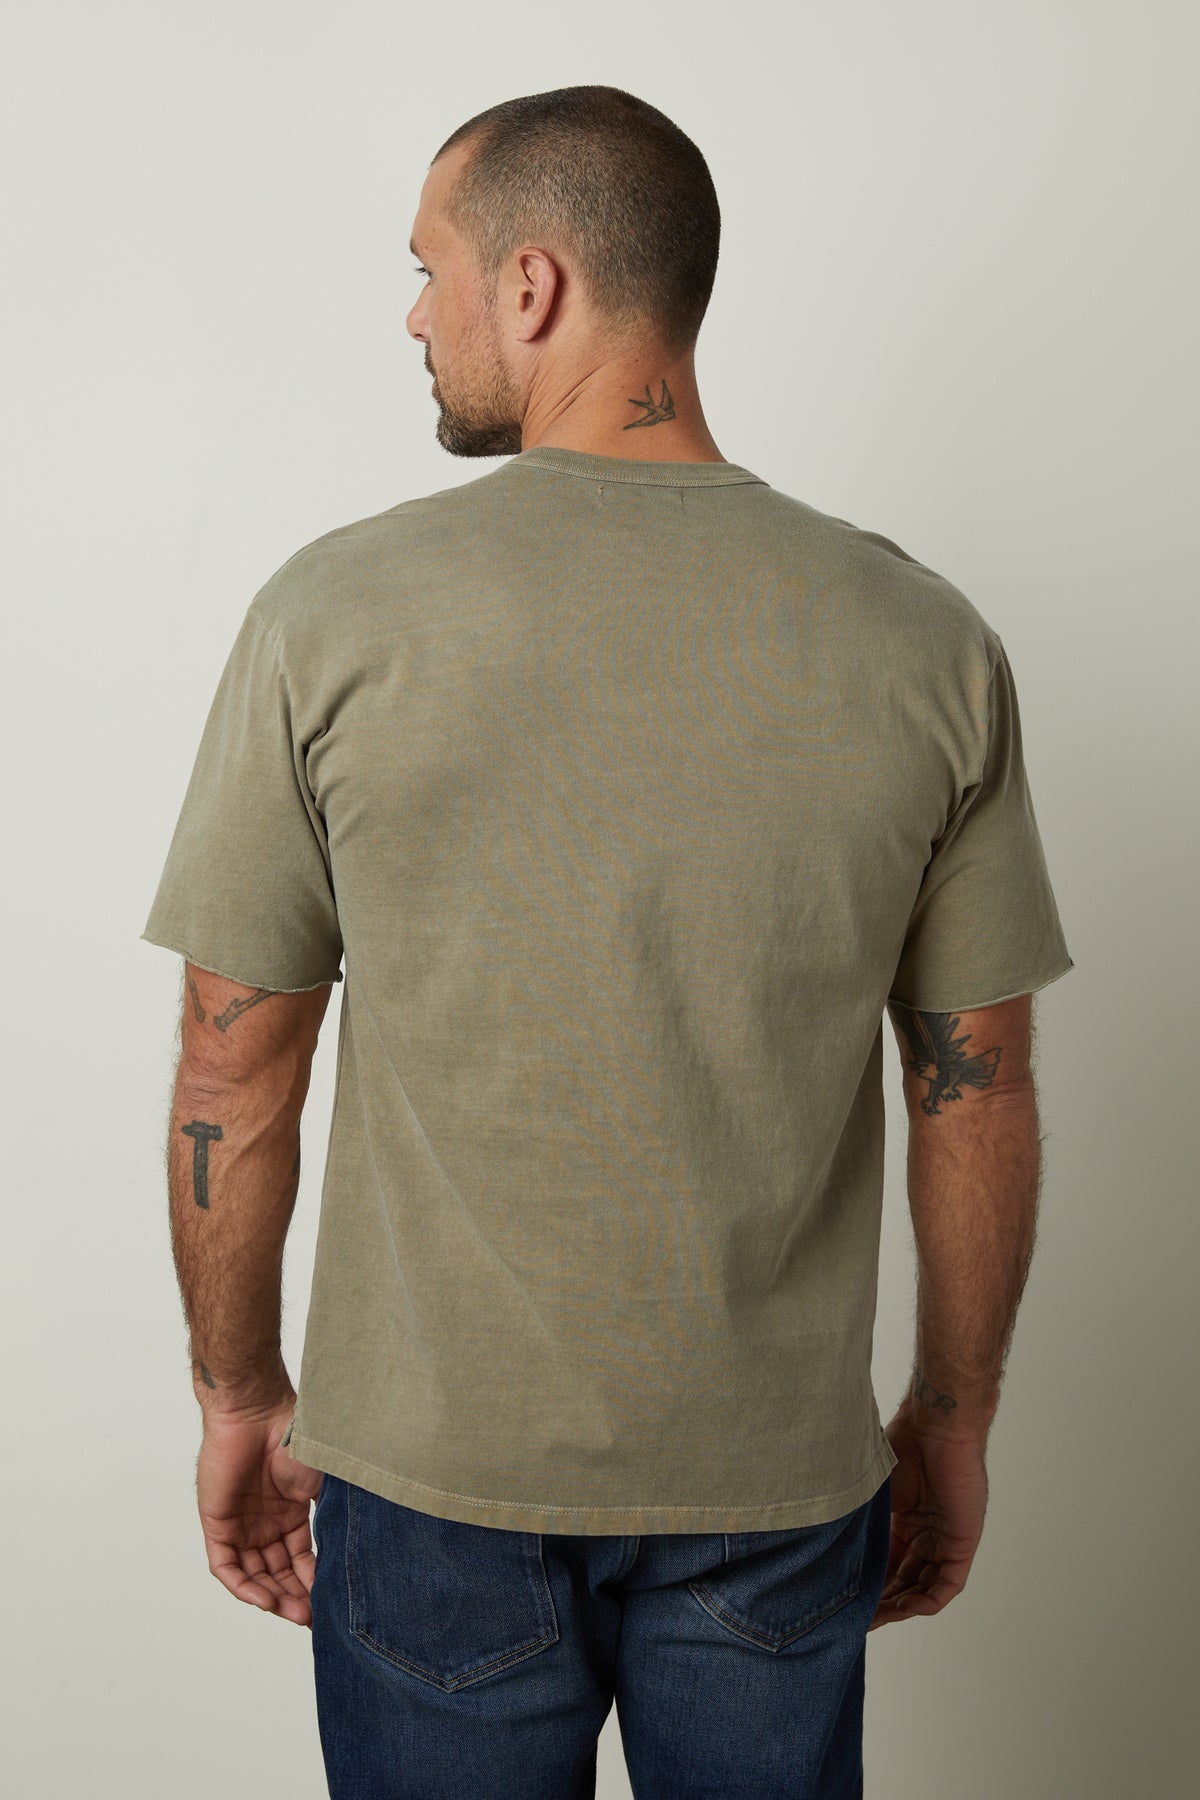   The back view of a man wearing a Velvet by Graham & Spencer NEPTUNE CREW NECK POCKET TEE. 